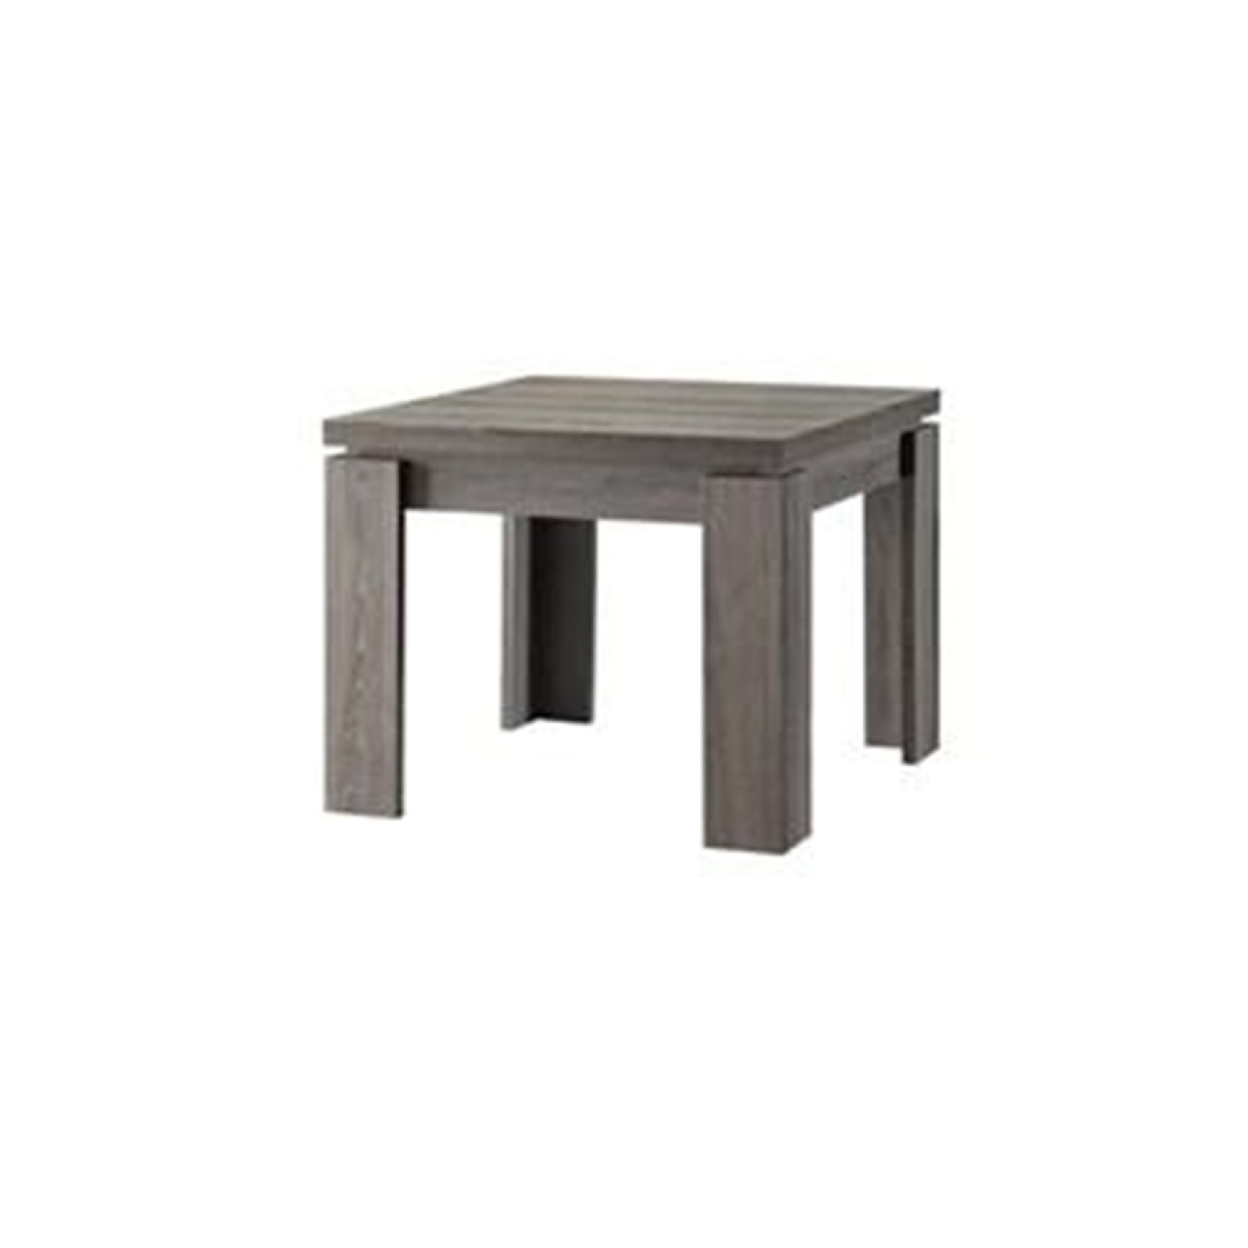 Enormous 3 Piece Weathered Gray Occasional Table Set- Saltoro Sherpi